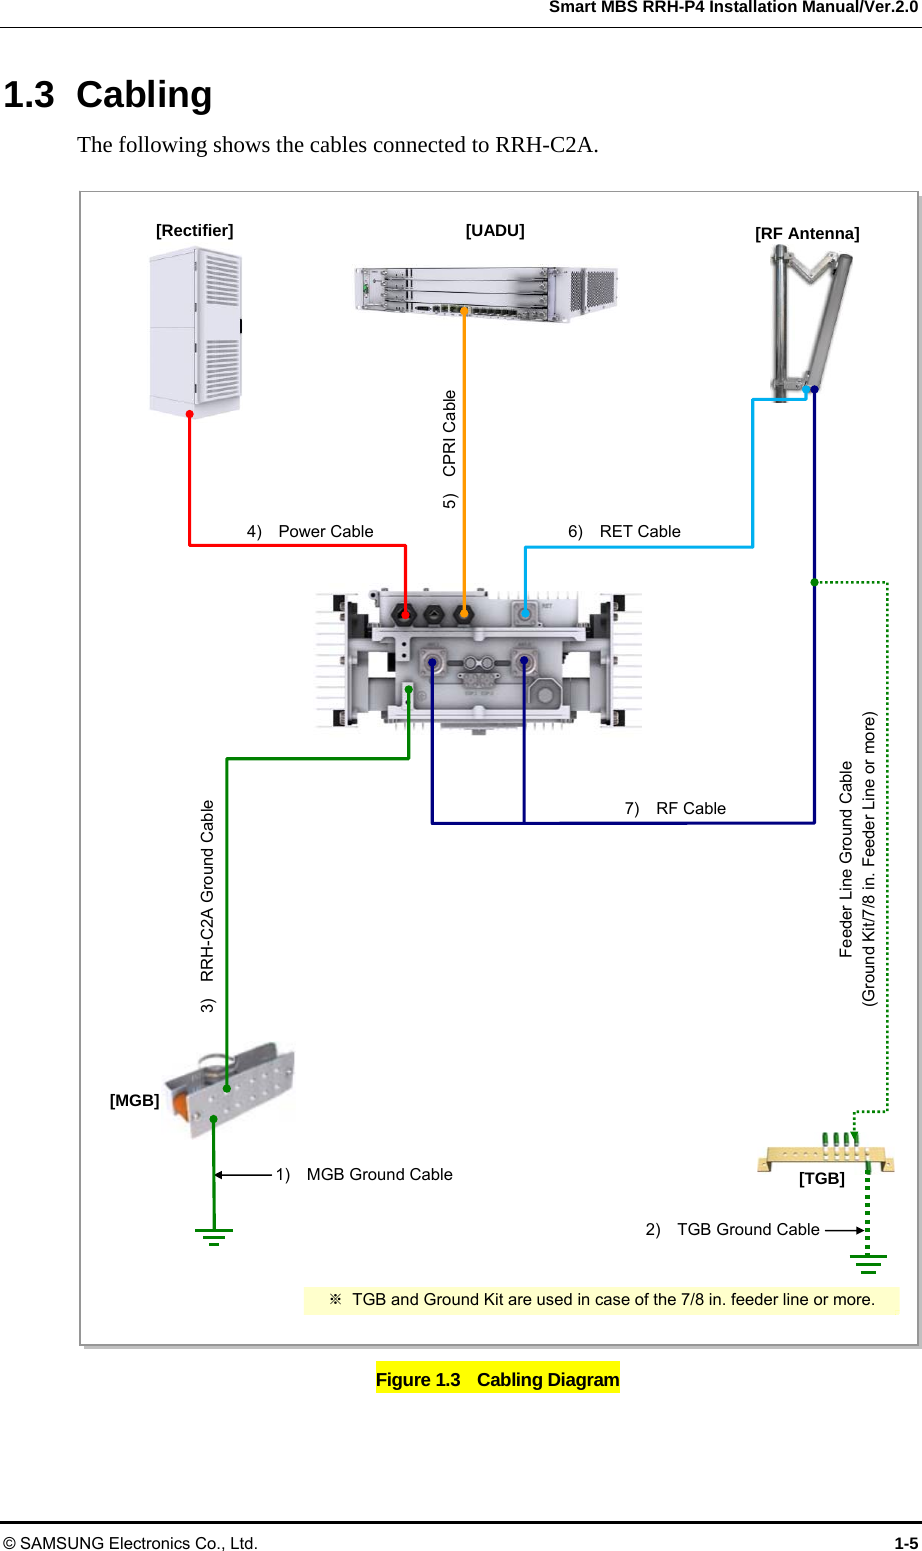  Smart MBS RRH-P4 Installation Manual/Ver.2.0 © SAMSUNG Electronics Co., Ltd.  1-5 1.3 Cabling The following shows the cables connected to RRH-C2A.  Figure 1.3    Cabling Diagram  3)  RRH-C2A Ground Cable [RF Antenna] [MGB] 2)  TGB Ground Cable[TGB] Feeder Line Ground Cable (Ground Kit/7/8 in. Feeder Line or more) ※  TGB and Ground Kit are used in case of the 7/8 in. feeder line or more. [Rectifier]  [UADU] 1)  MGB Ground Cable 5)  CPRI Cable 6)  RET Cable 7)  RF Cable 4)  Power Cable 